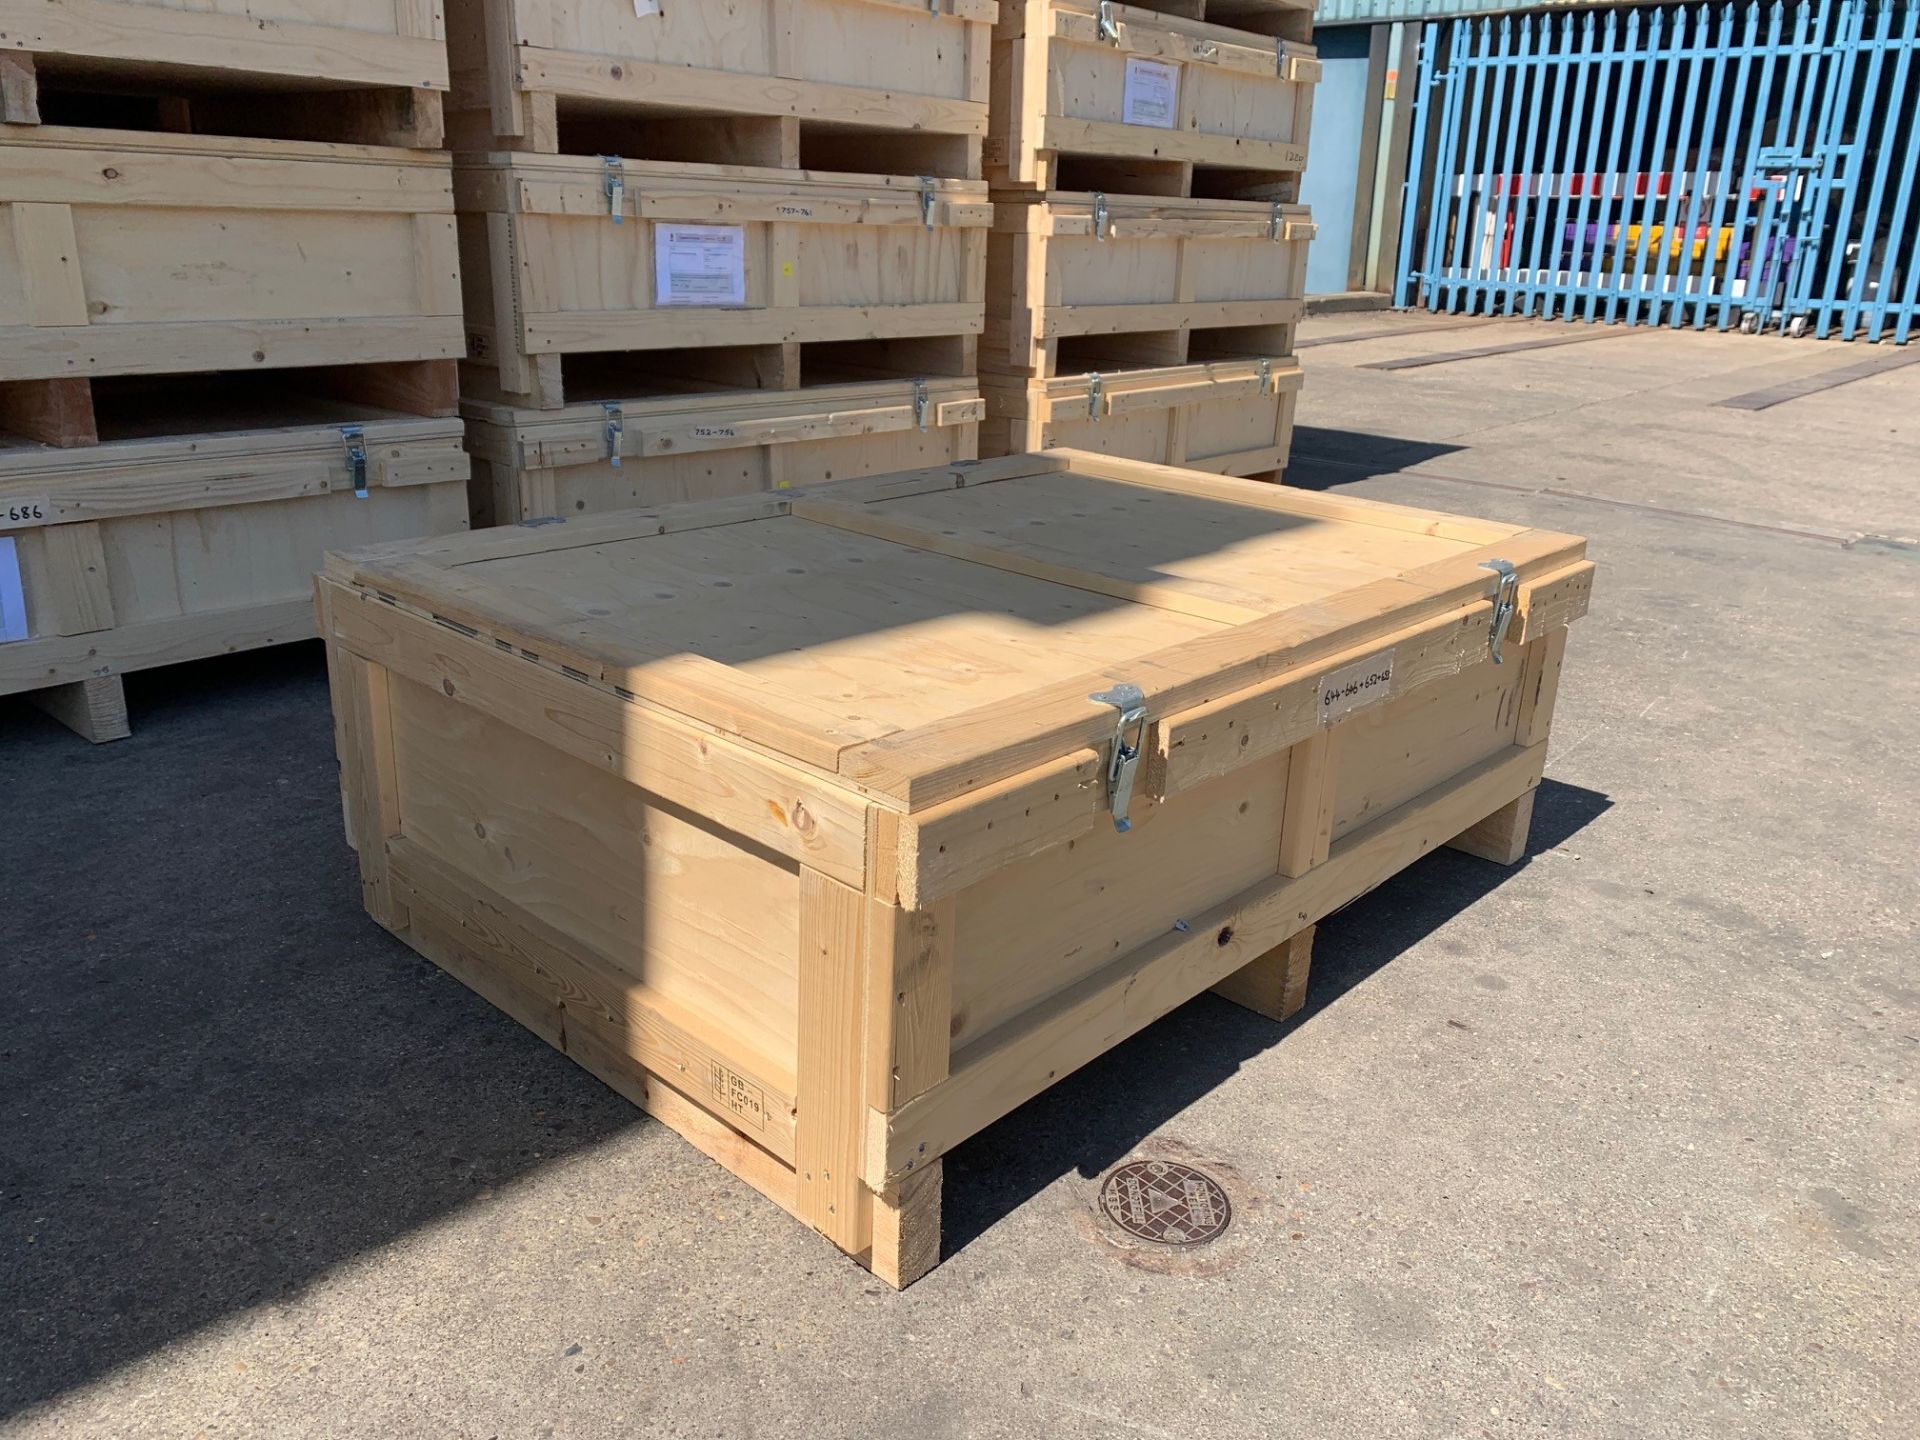 5x Wooden Shipping crates - External Dimensions - L122 x W89 x H43 - Image 3 of 7